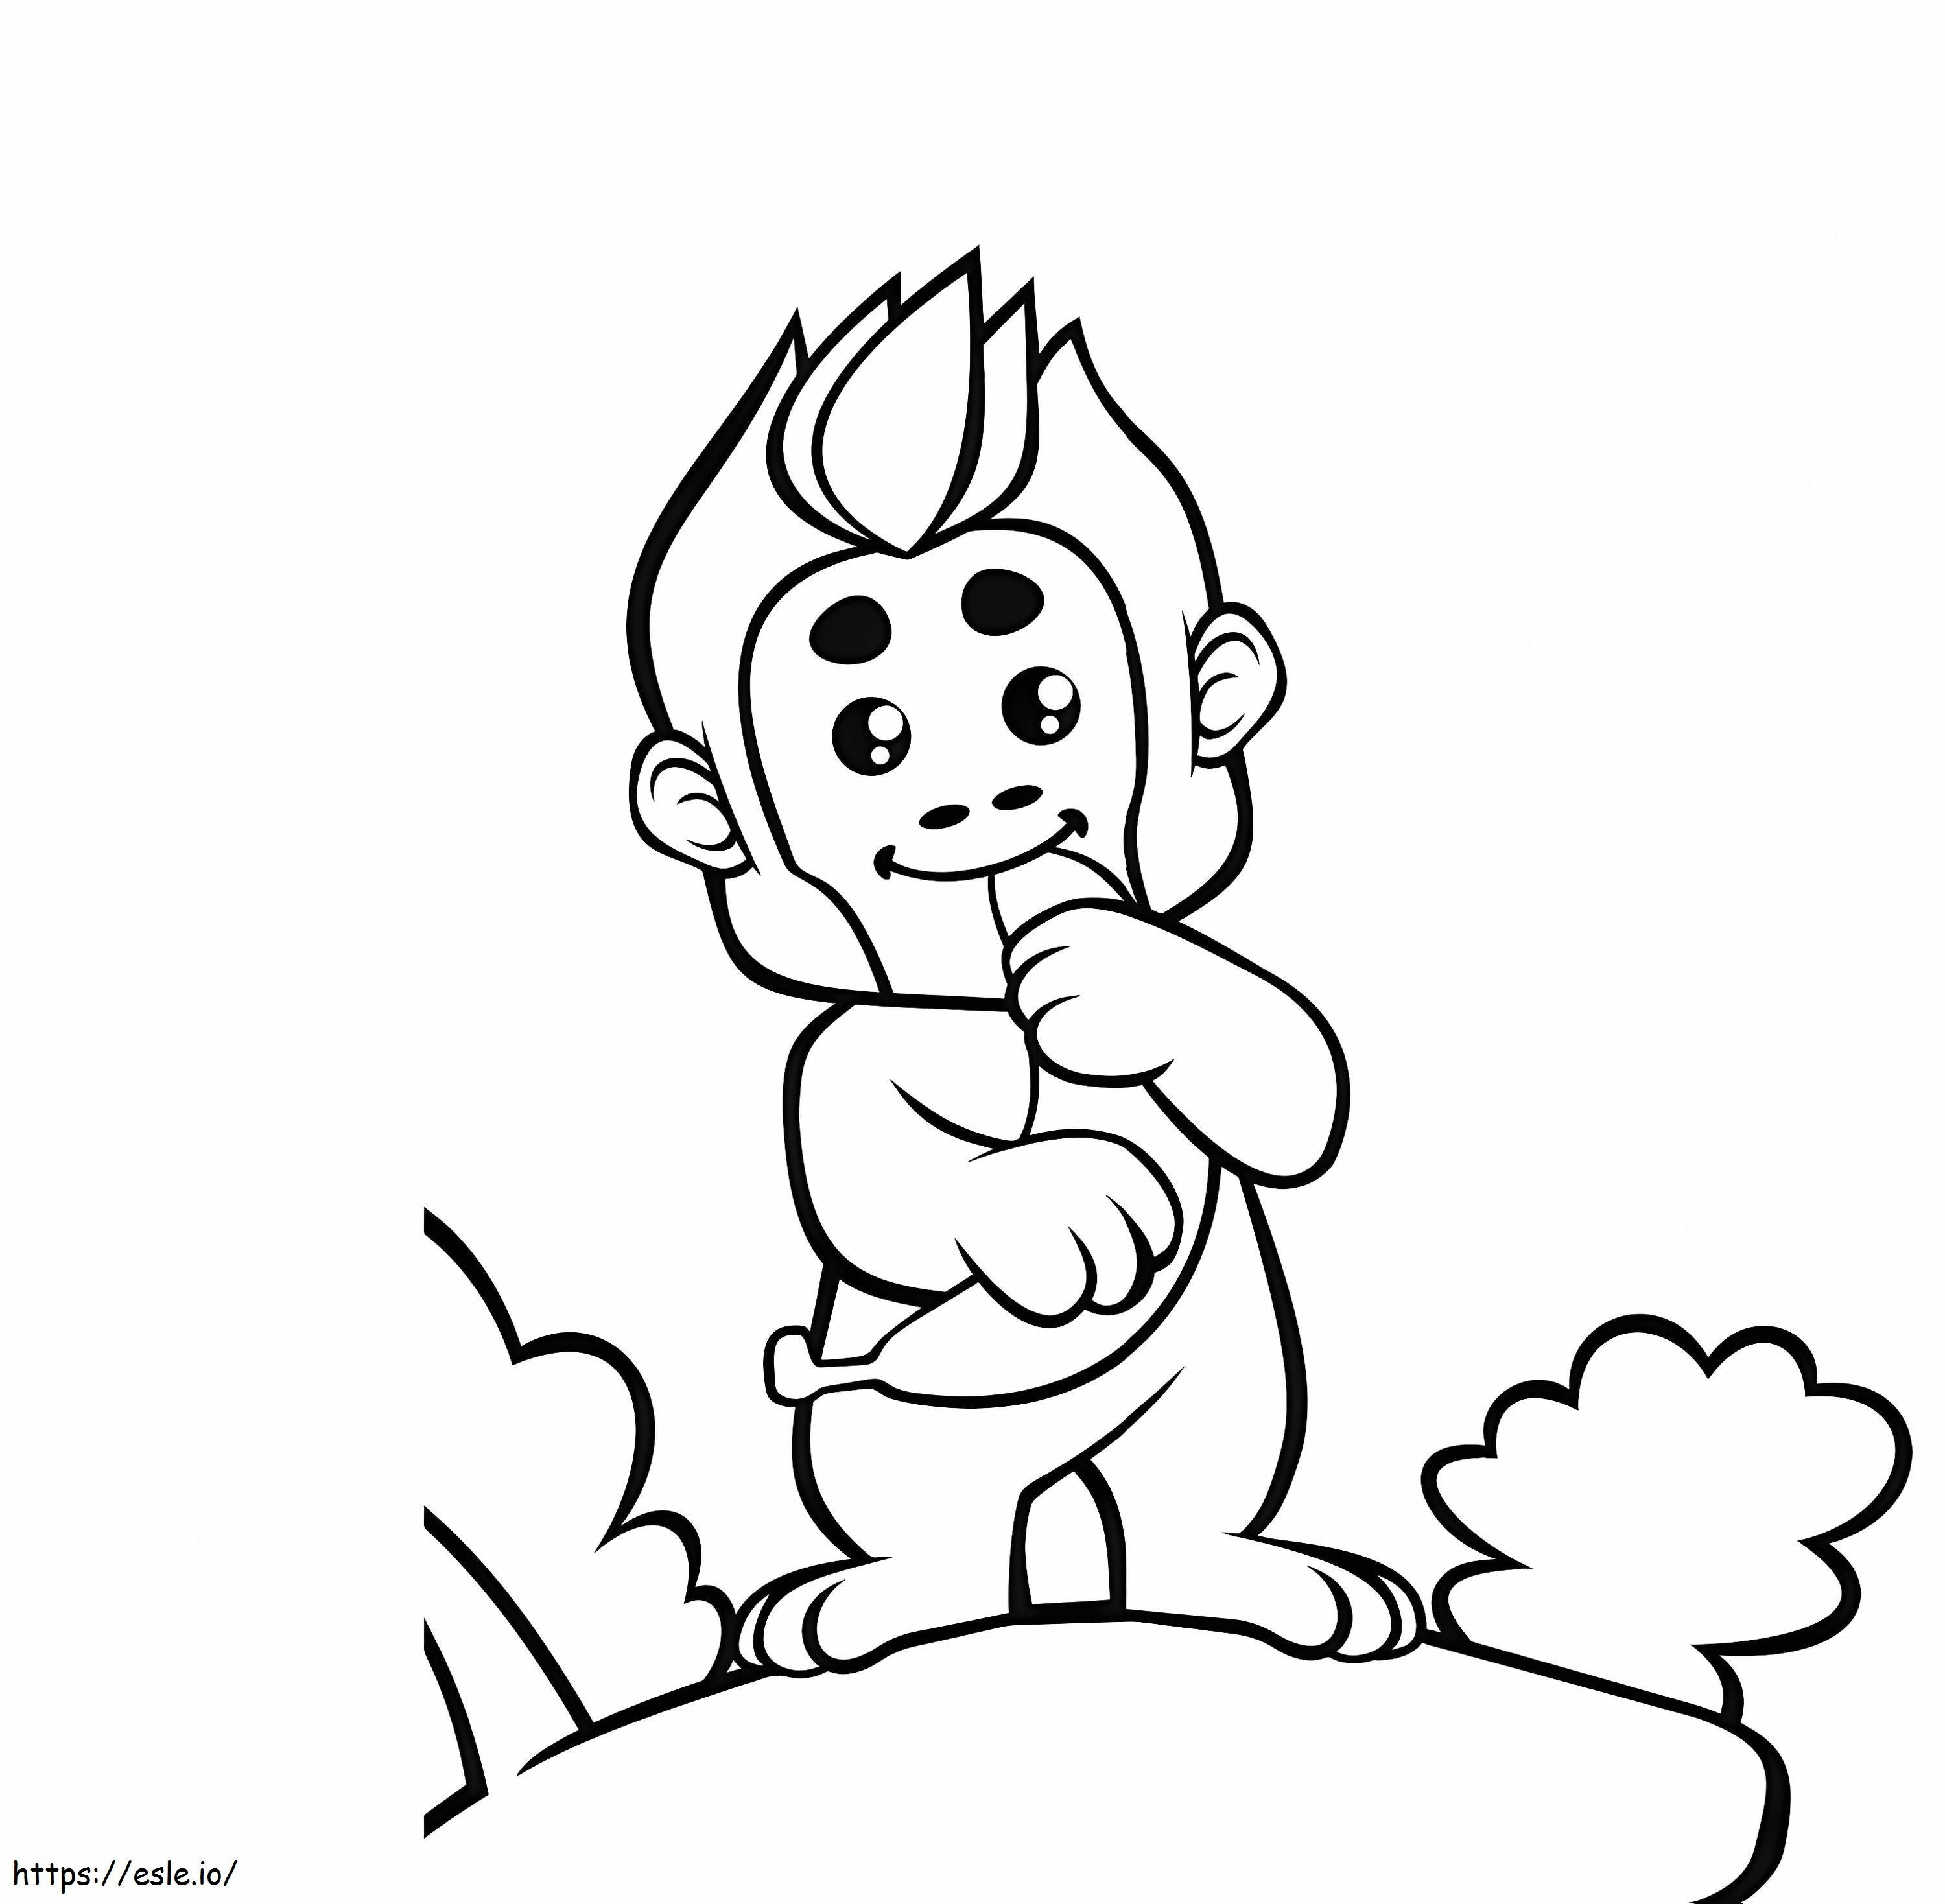 1559704477 Cute Ape With Banana A4 coloring page